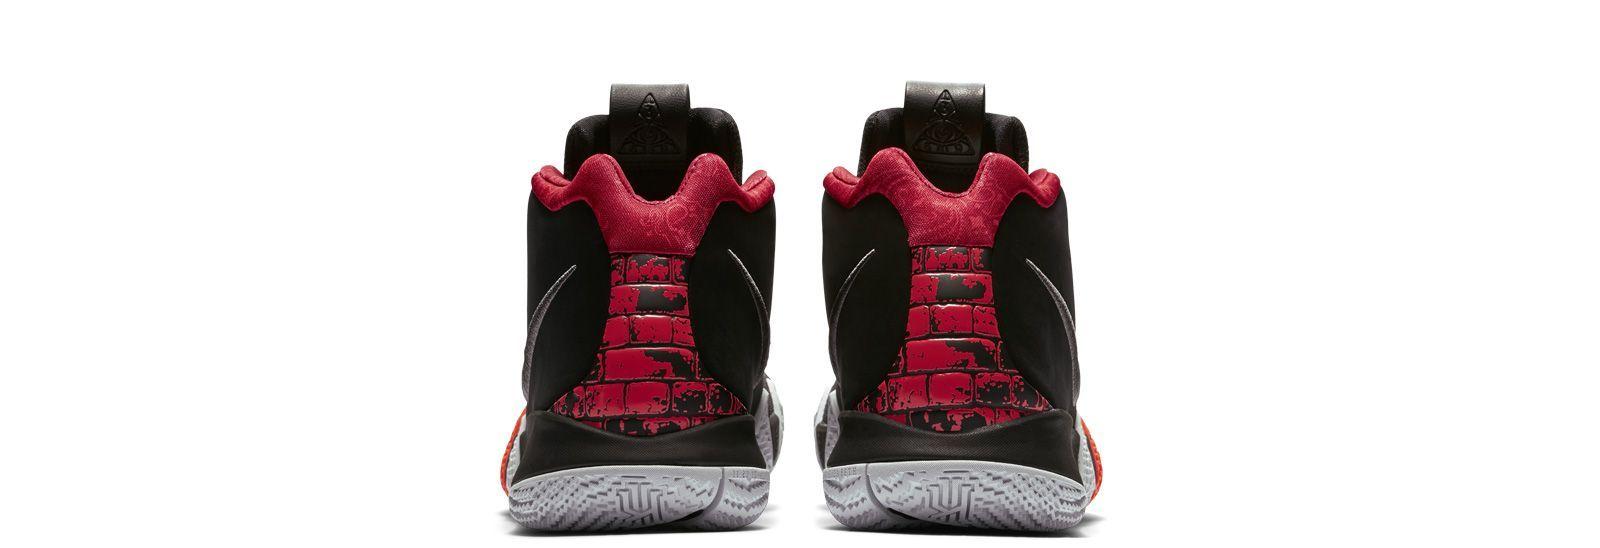 Mixed Red and Black Nike Logo - Kyrie 4. Nike.com